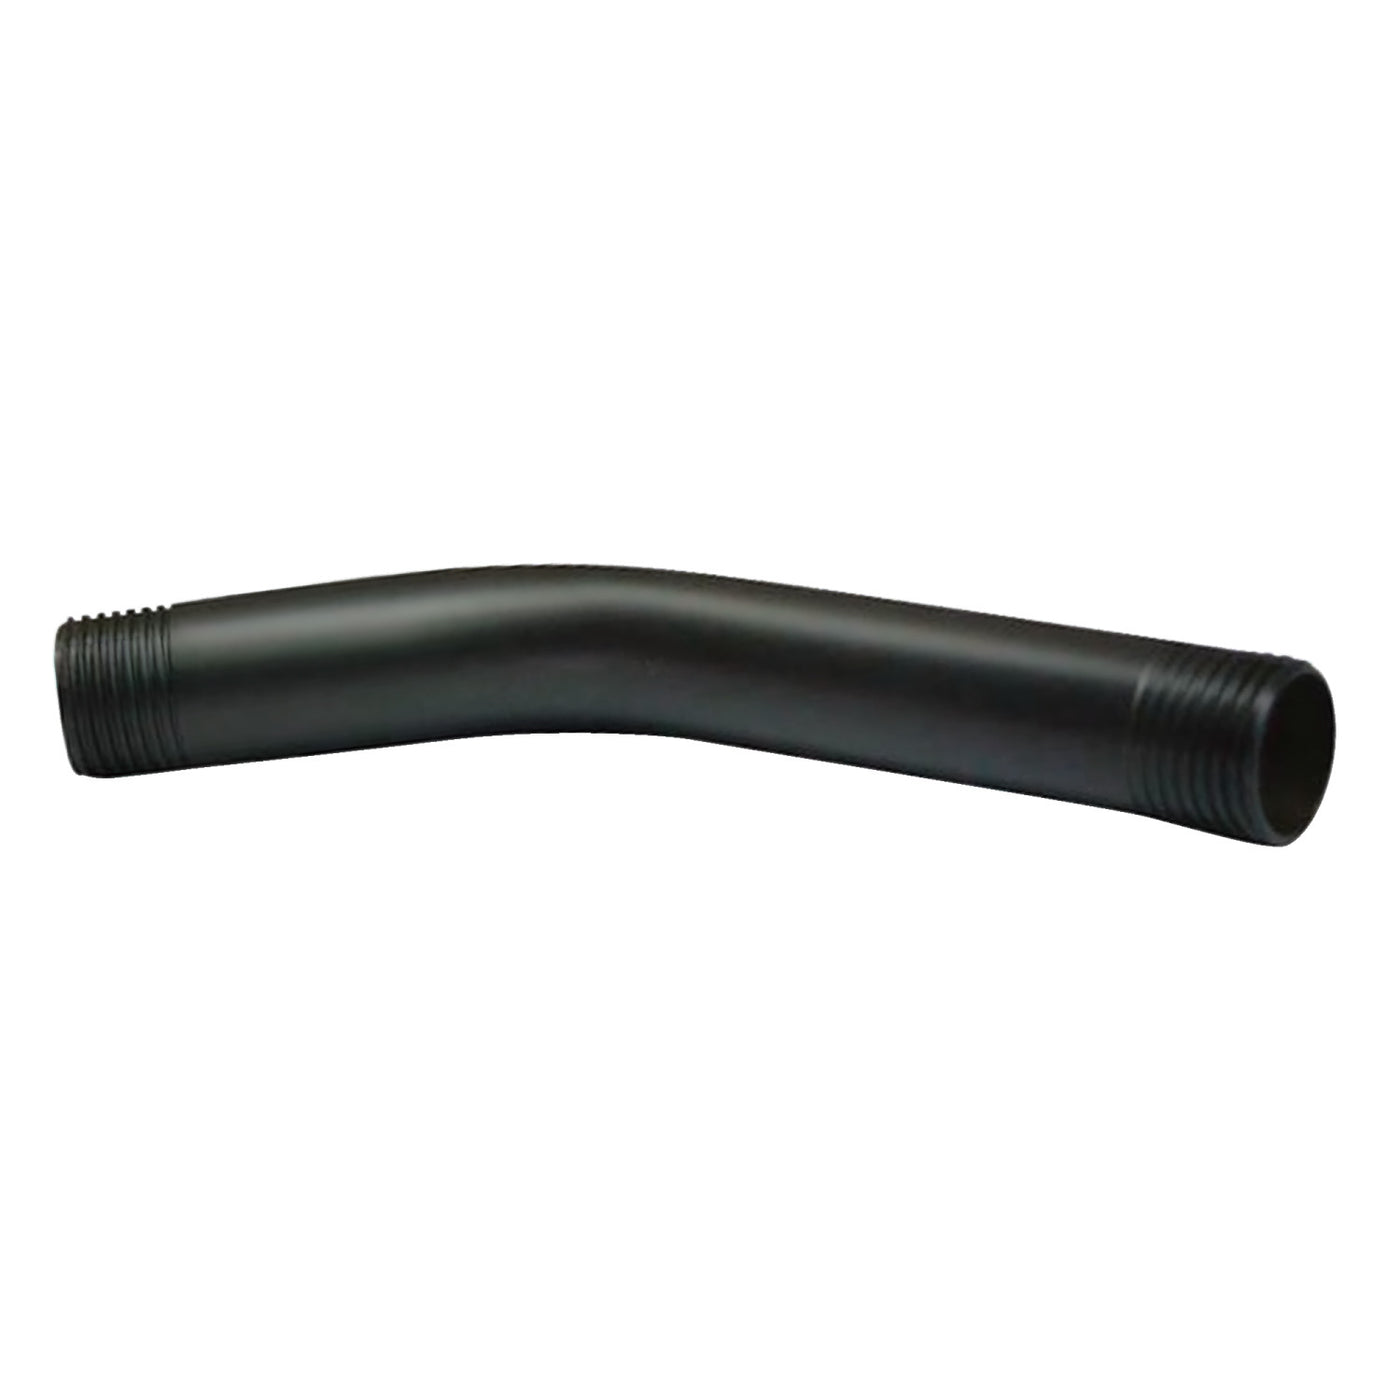 Elements of Design DK150A5 6-Inch Shower Arm, Oil Rubbed Bronze